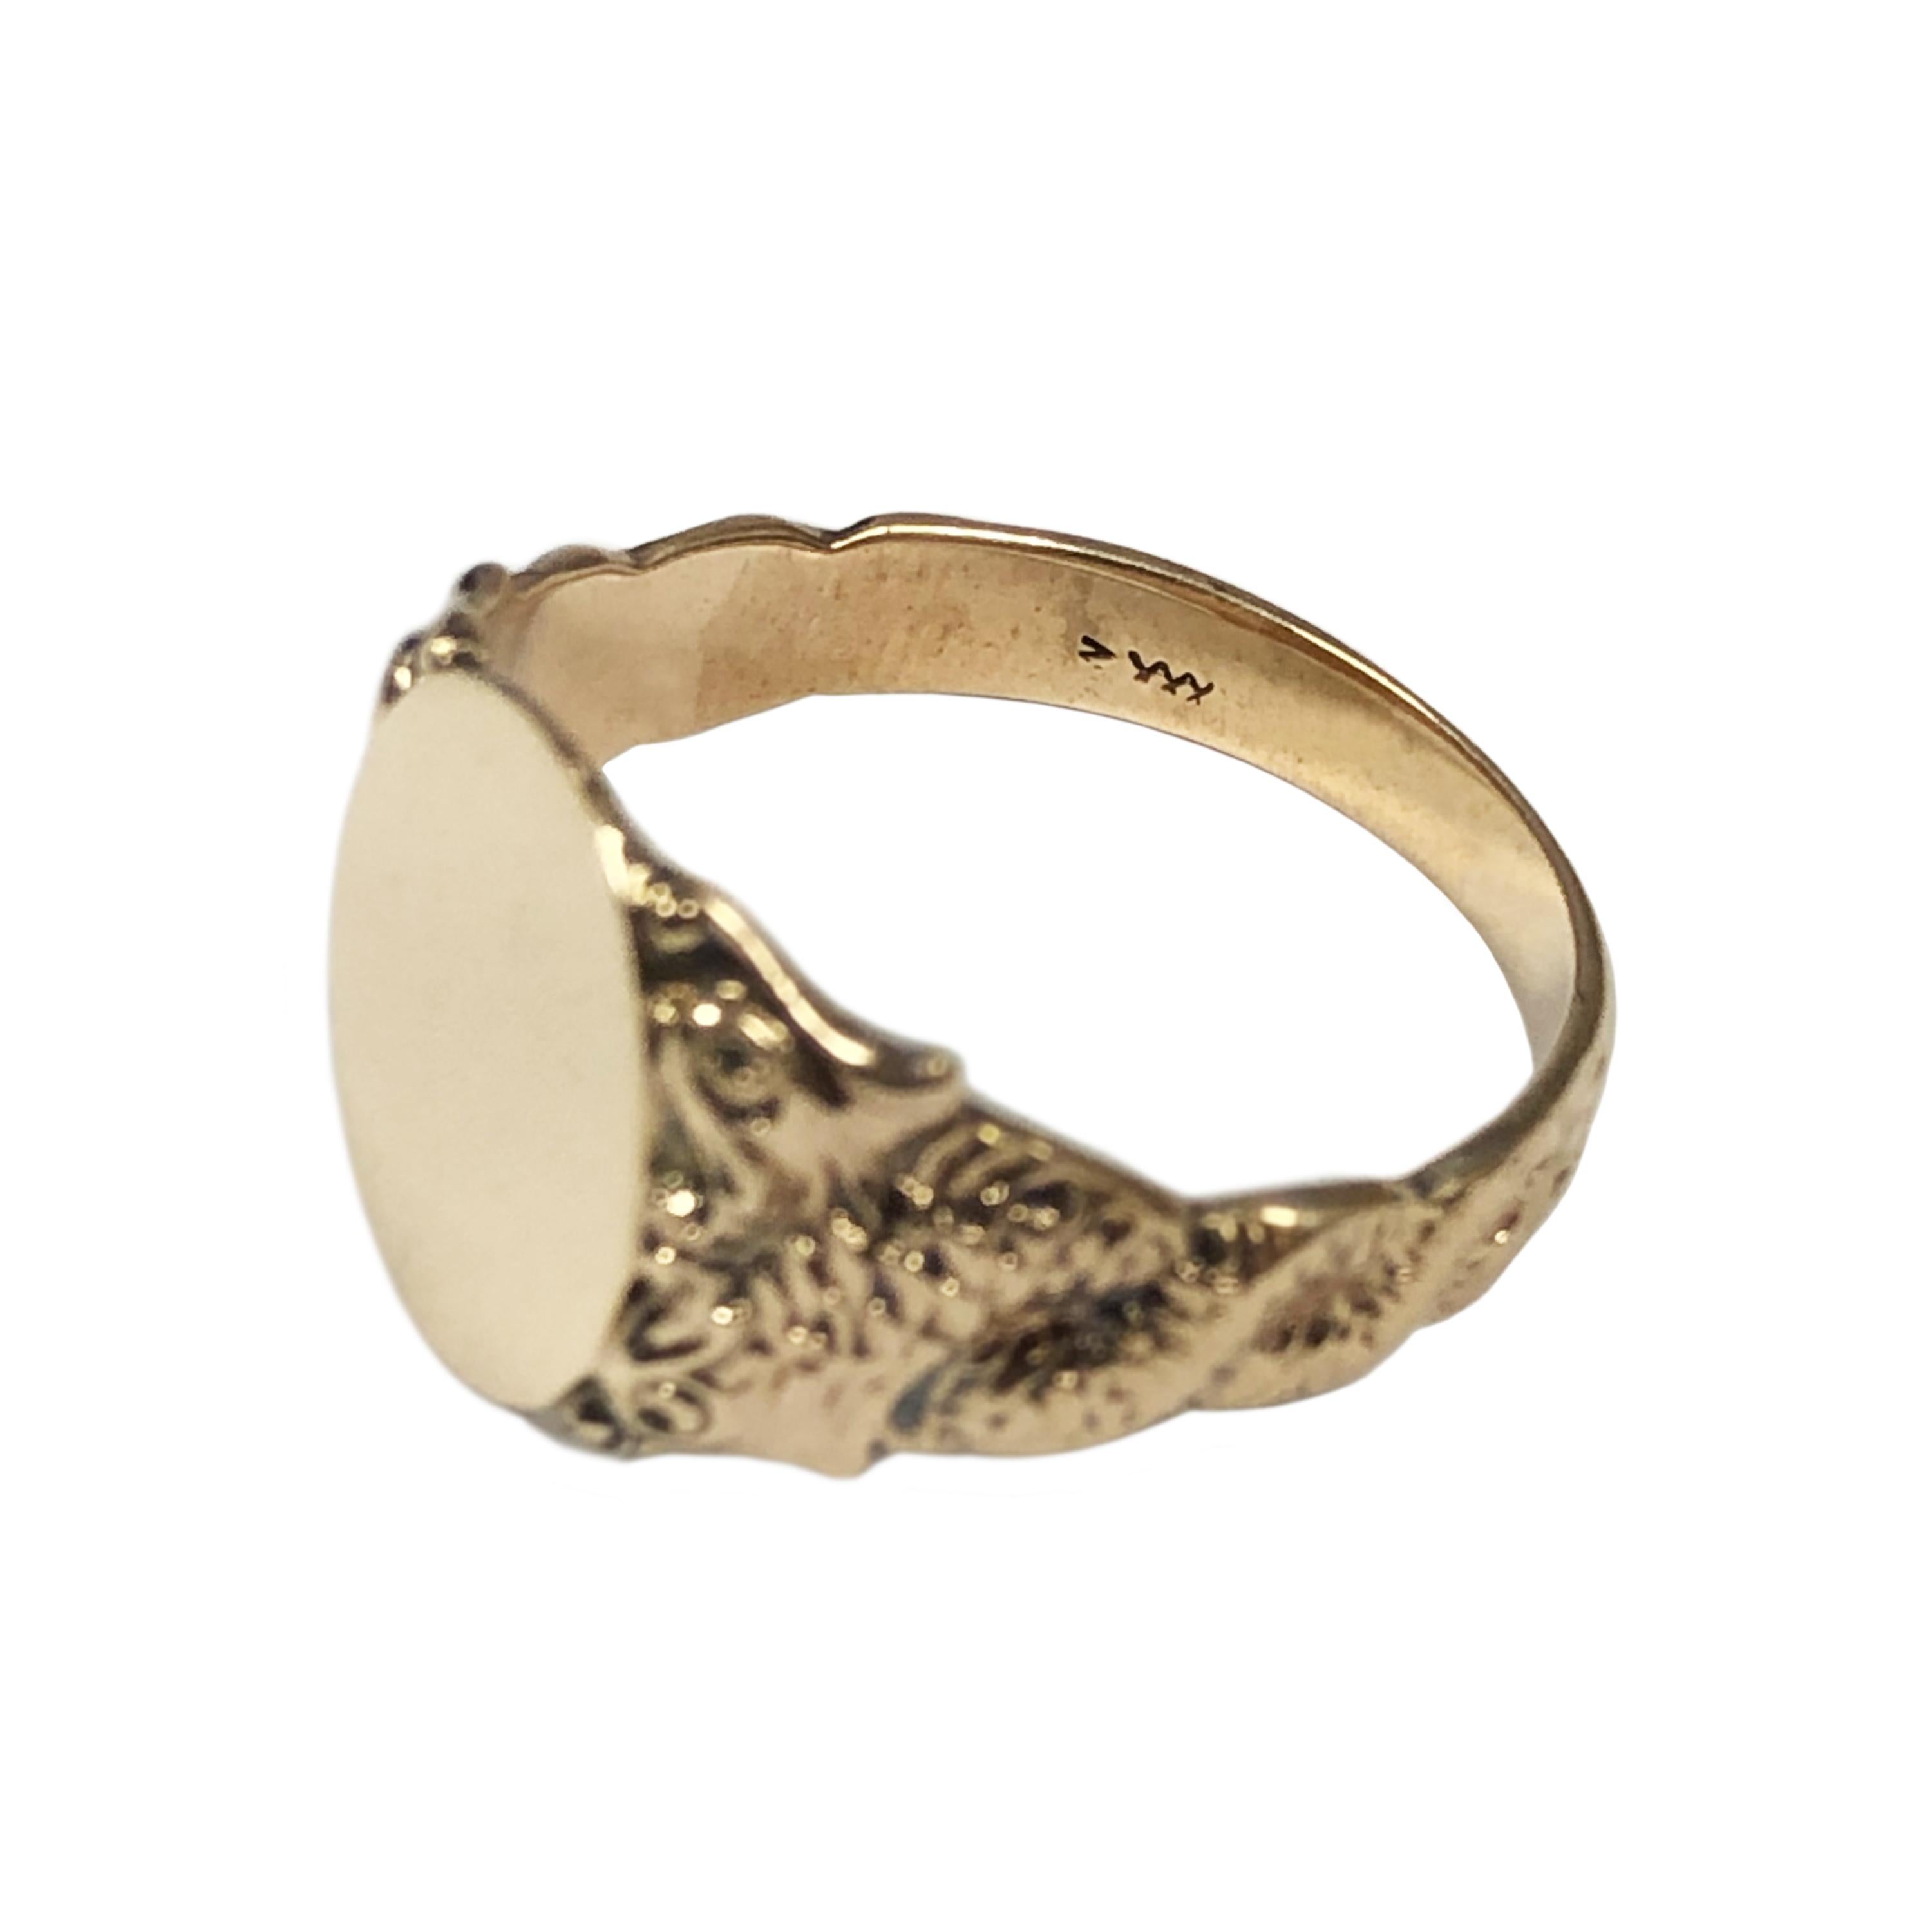 Circa 1910 14K Yellow Gold Signet Ring, the top measures 9/16 X 7/16 inch, the sides of the ring are heavy chased intertwined serpents with a double head at the top. Finger size 11.  